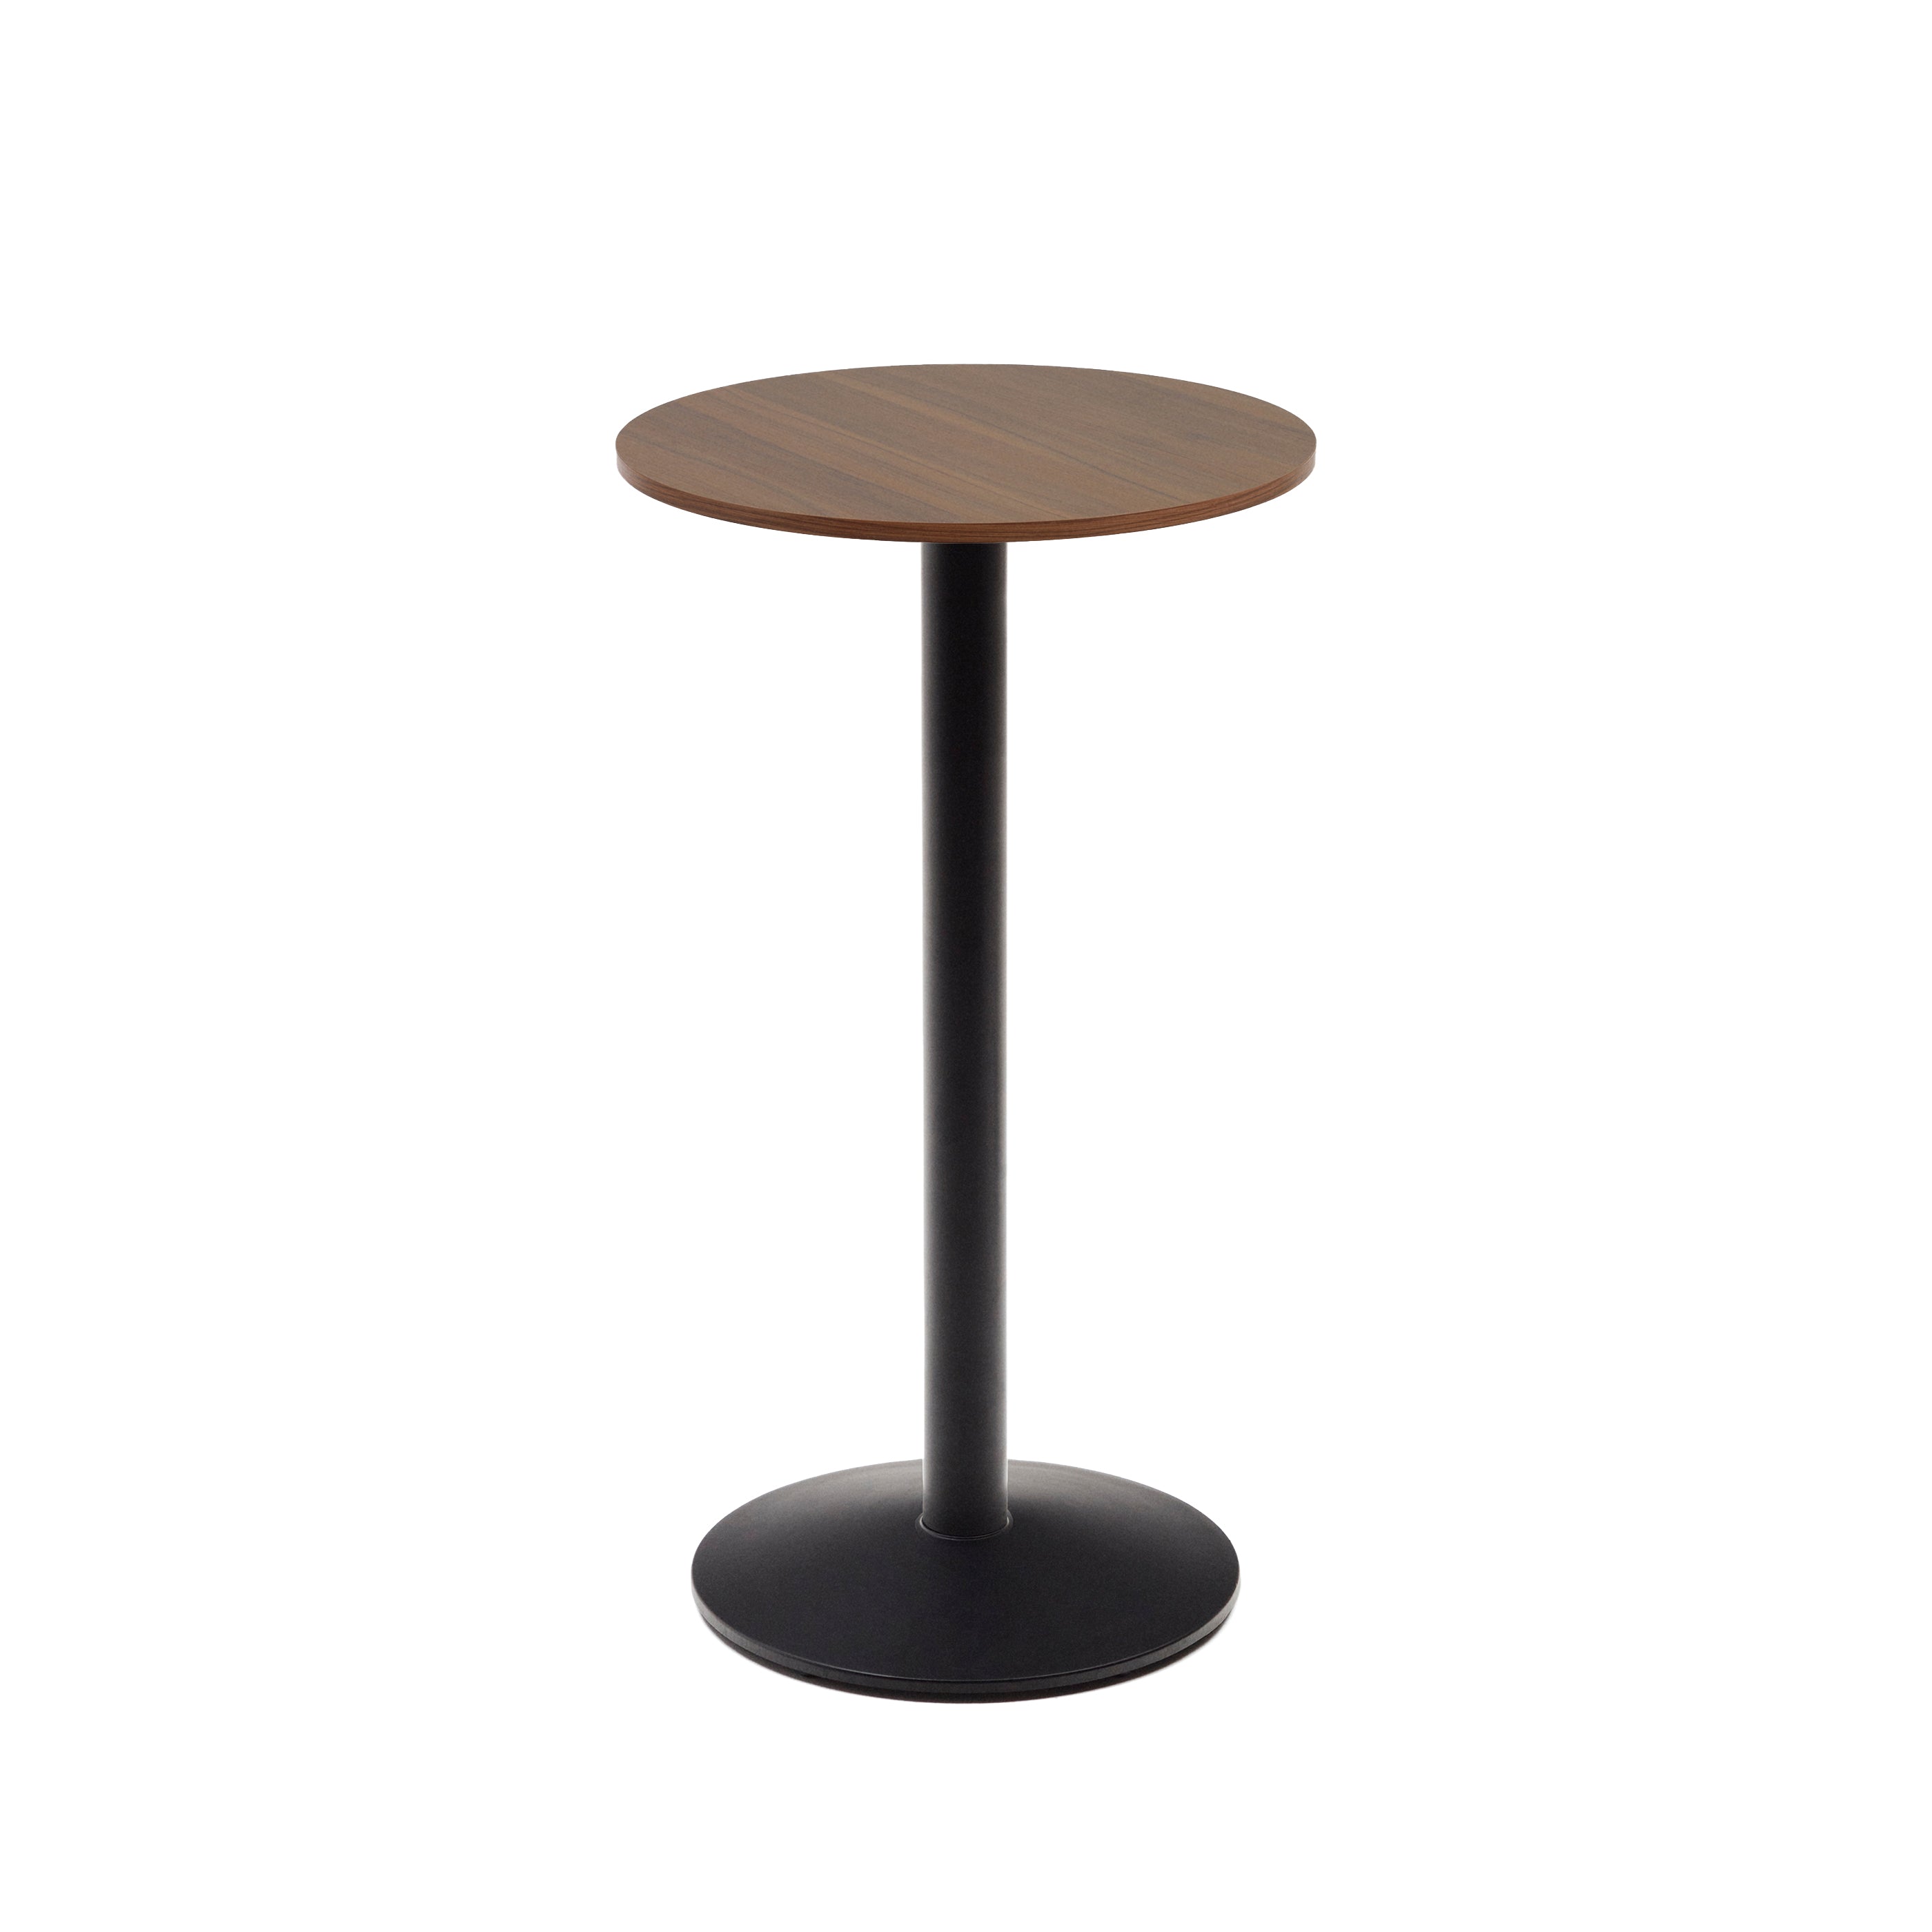 Esilda high round table in walnut finish melamine with metal leg in a painted black finish, Ø60x96cm